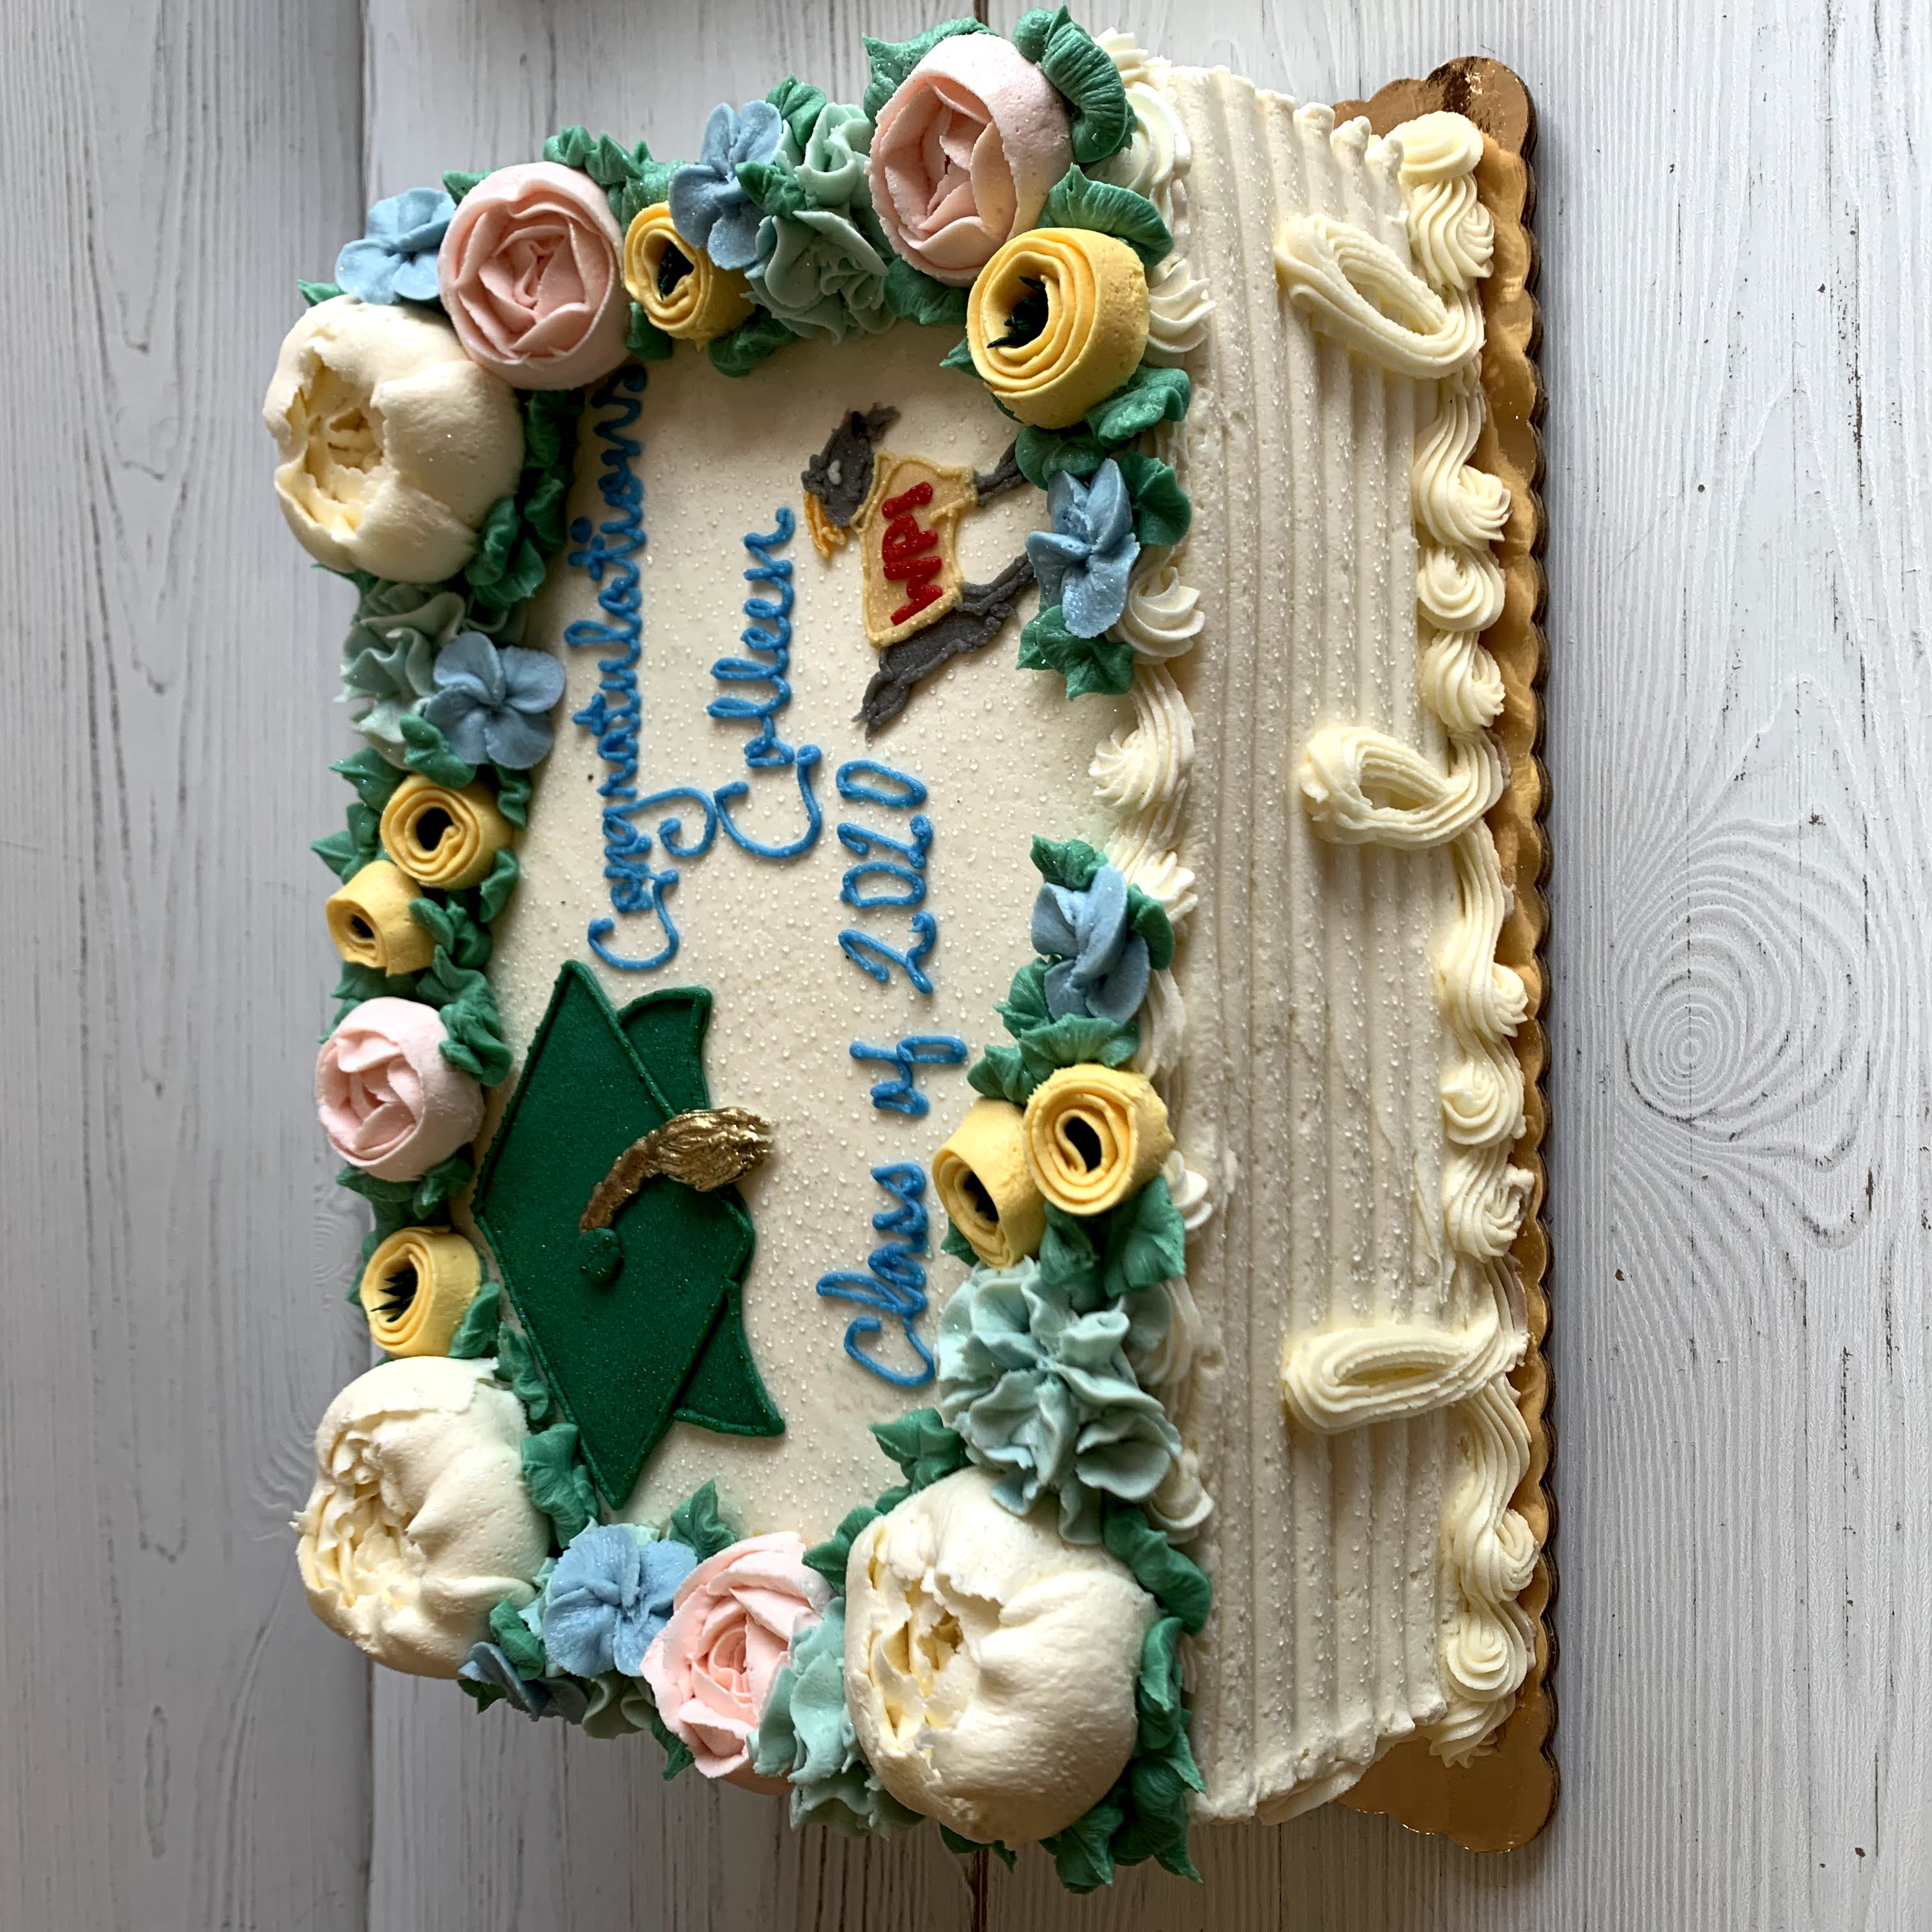 Floral Graduation Cake with Grad Cap and Logo